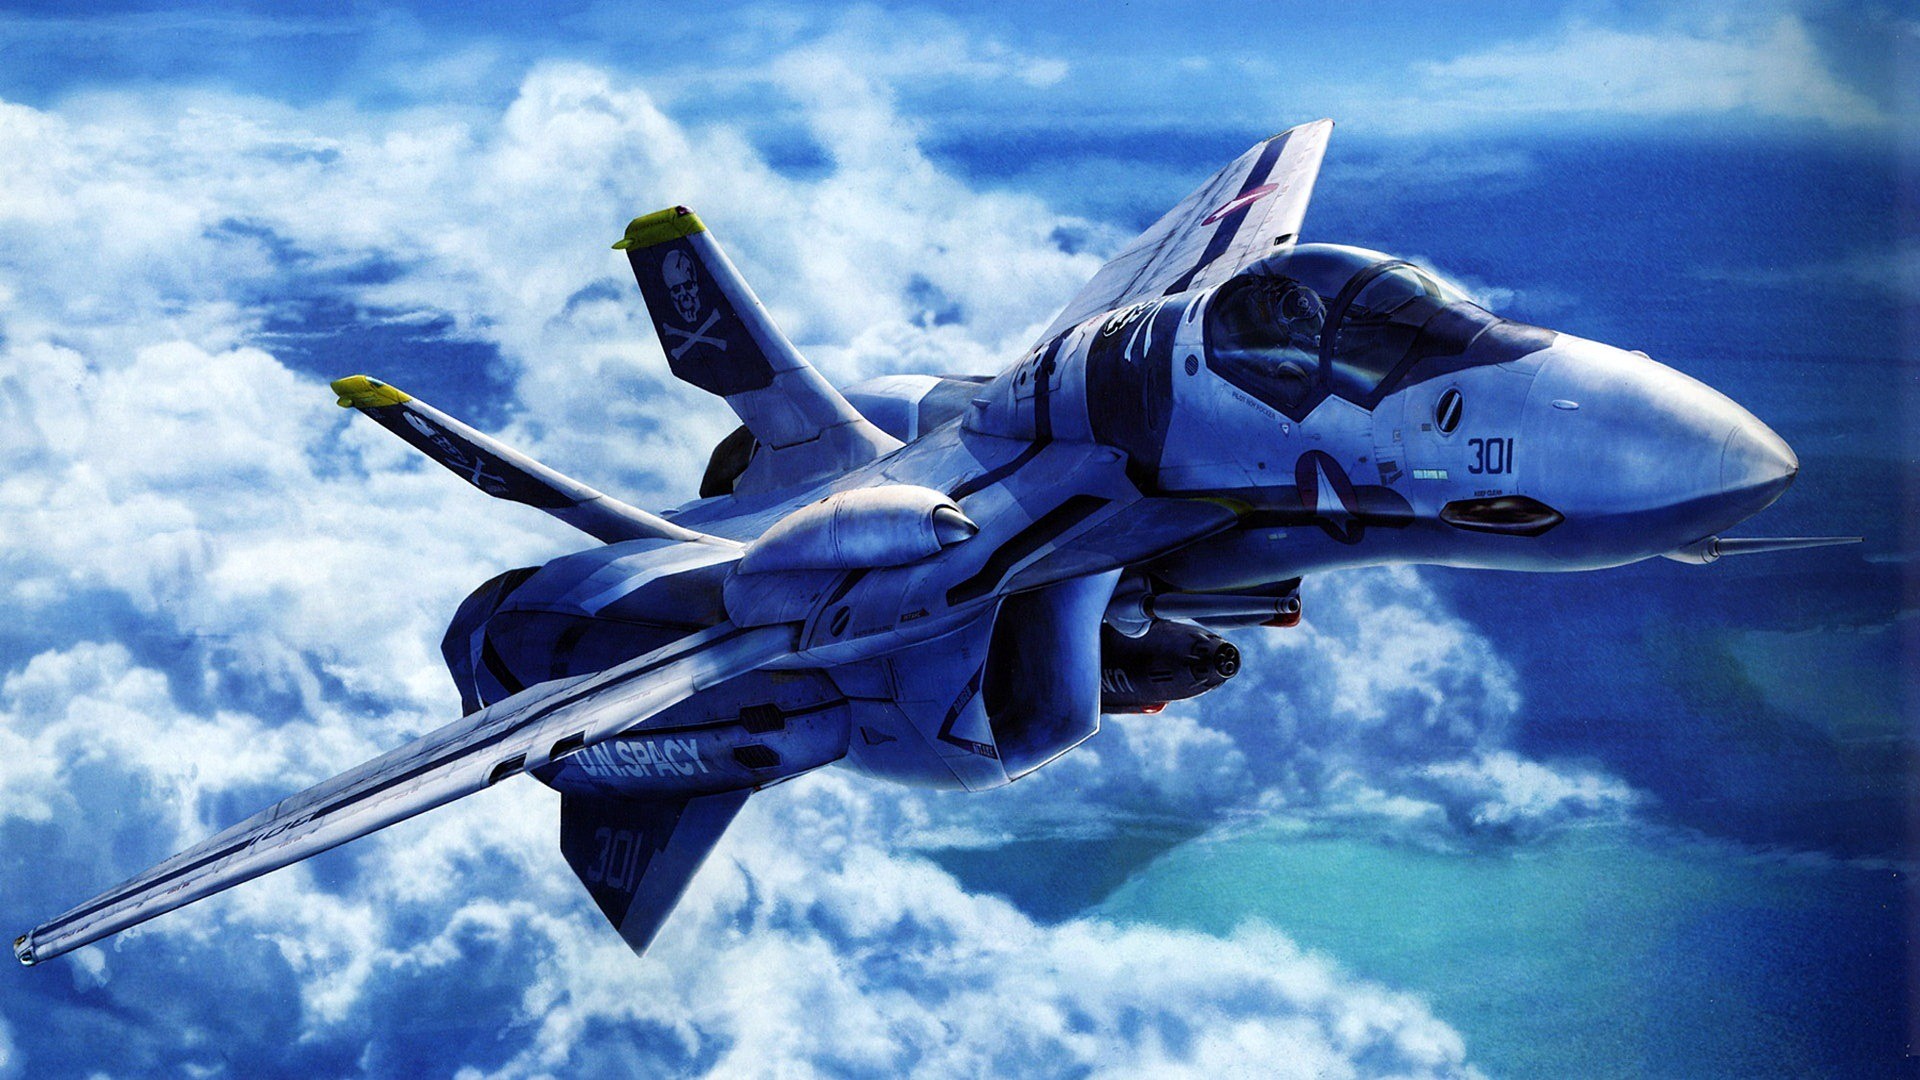 1920x1080 Fighter Jet Wallpapers Photos Best Fighter JetBest Fighter Jet 